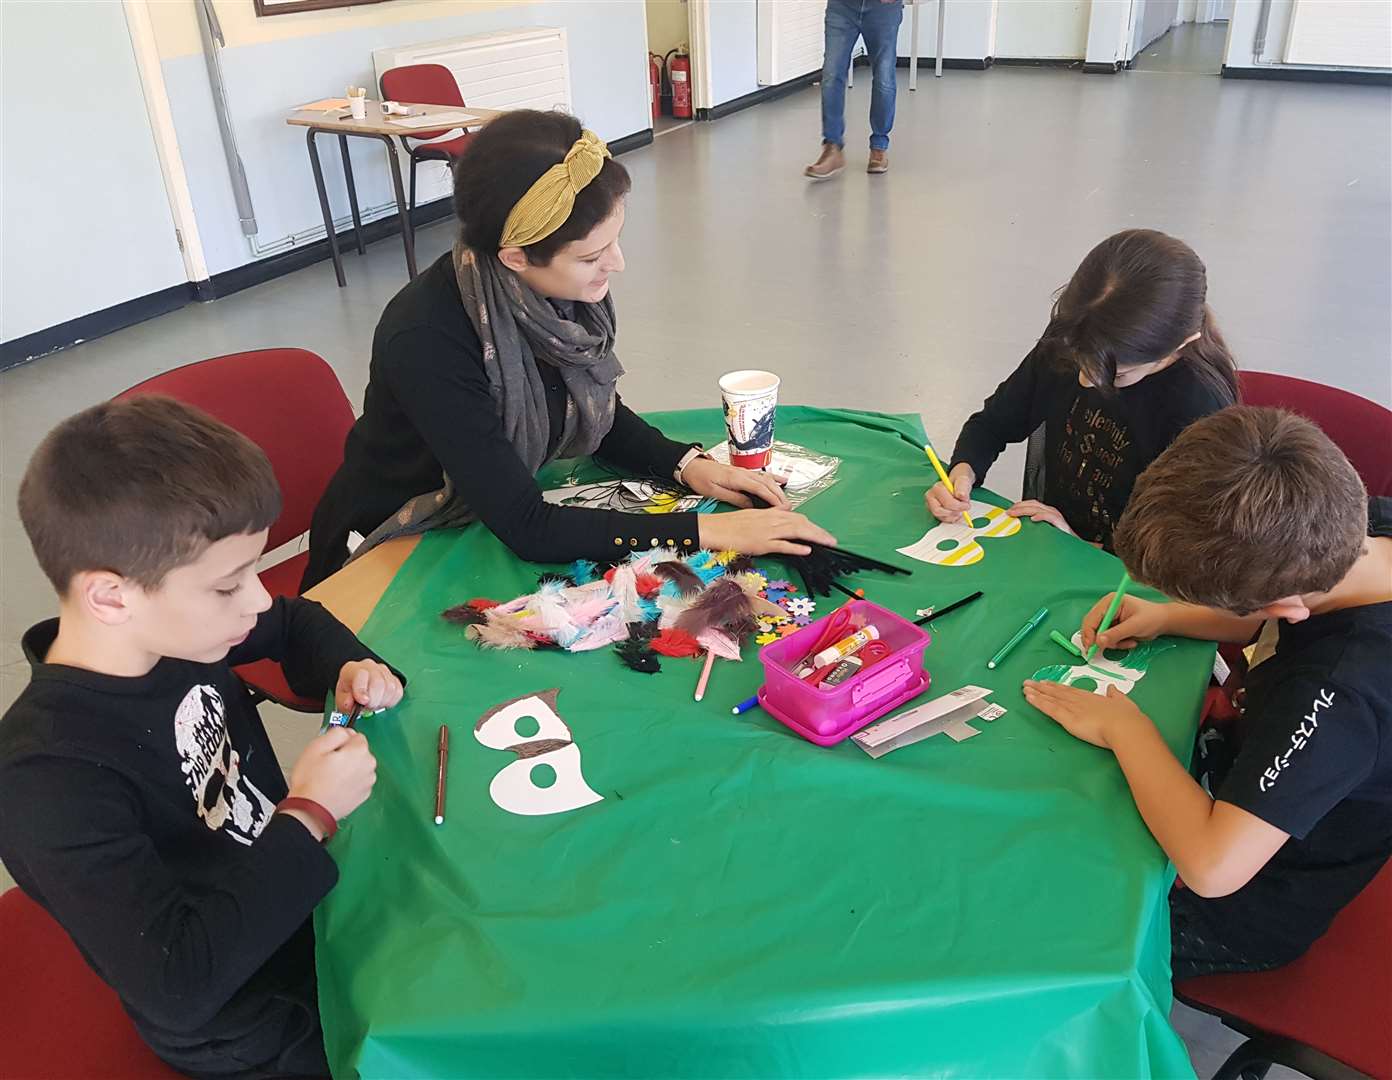 Cllr Laura Edie helps kids during a mask making activity. Photo: Laura Edie/Save Swanscombe Peninsula